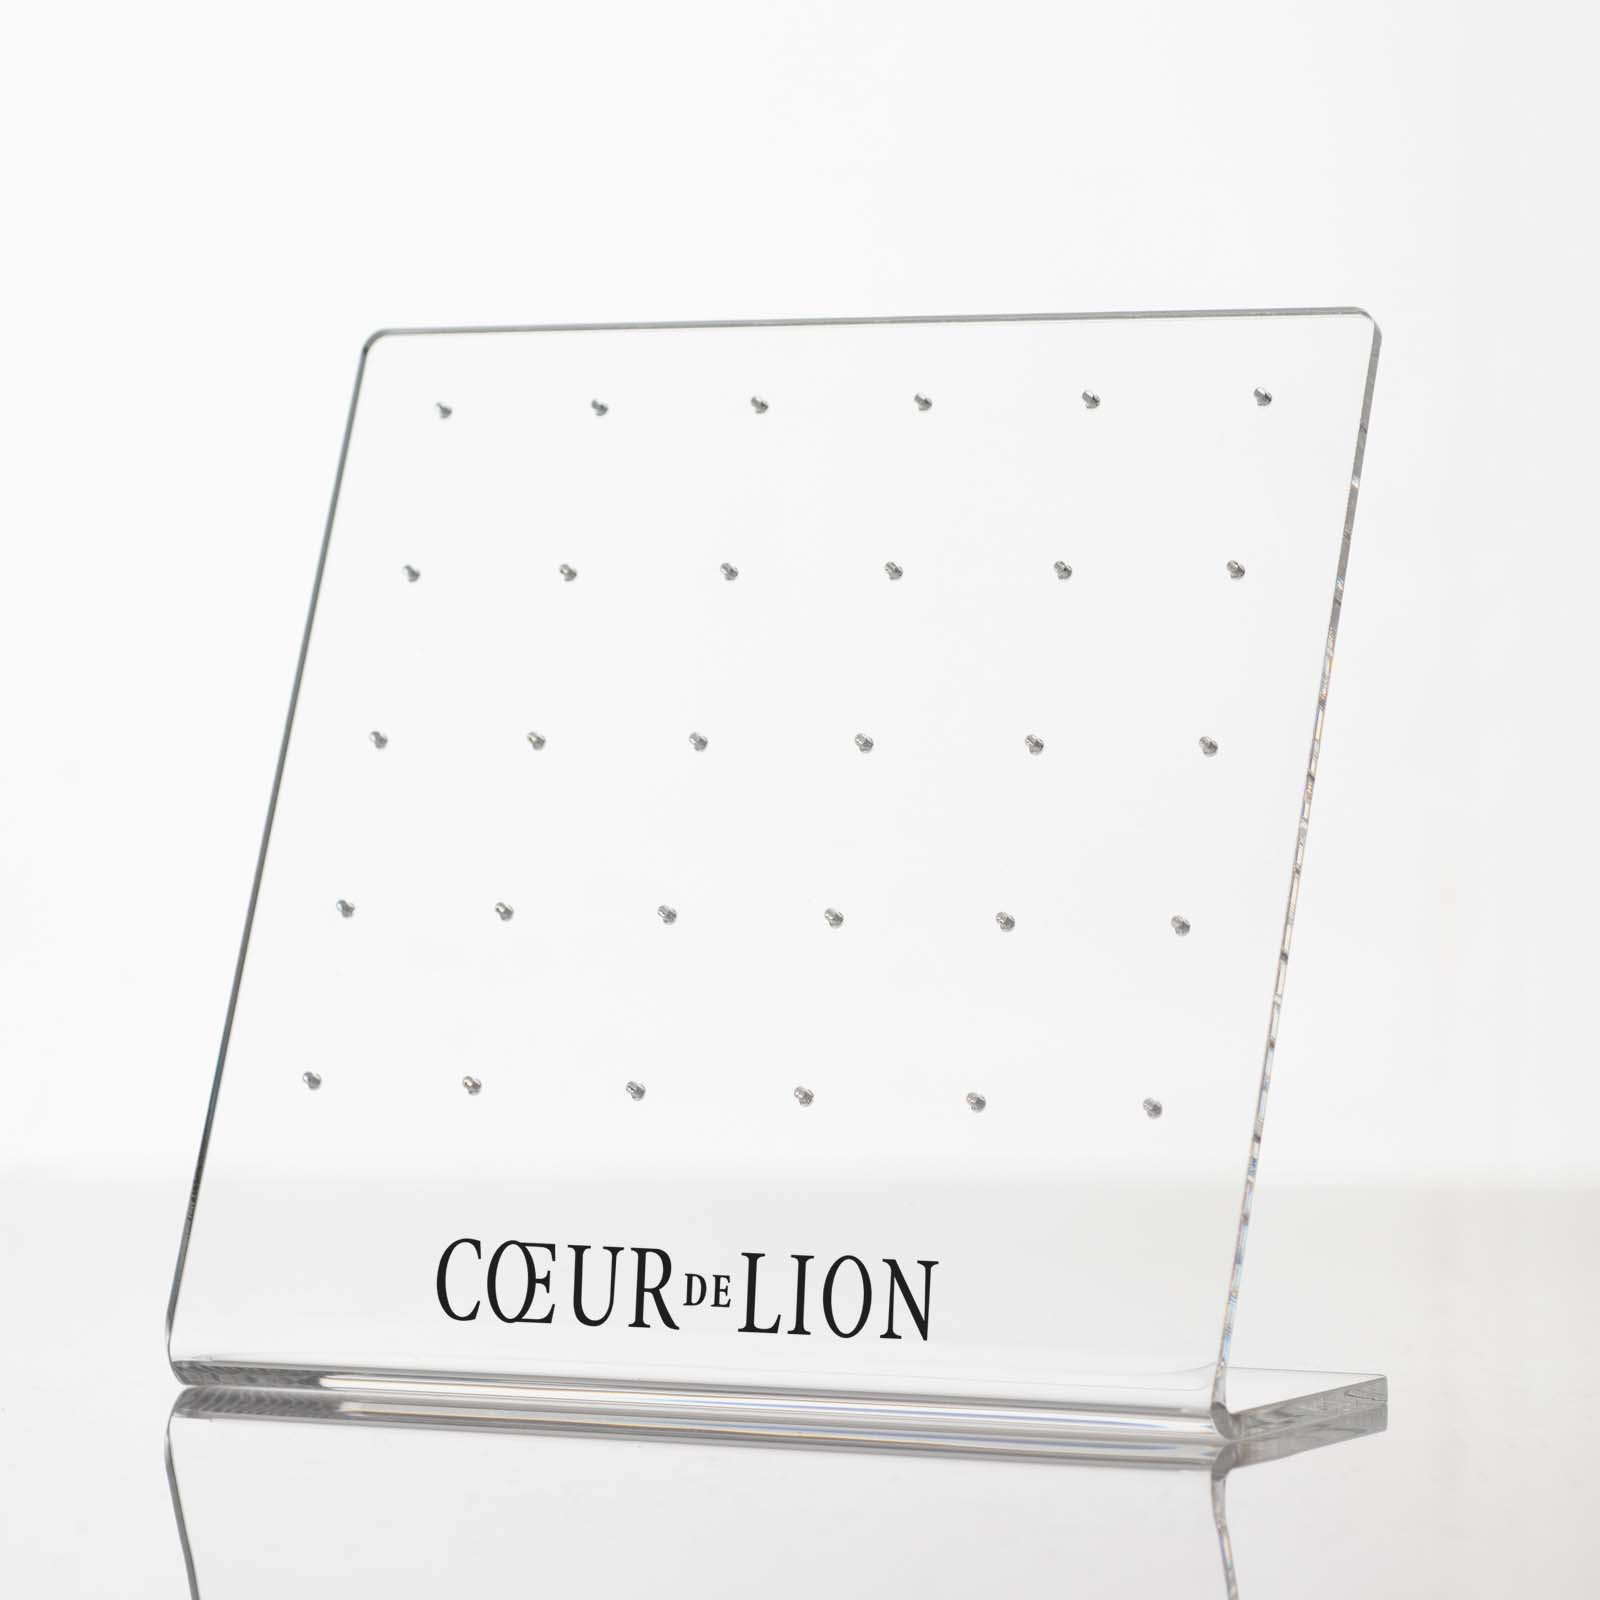 Acrylic stud earring presentation stand with 1/0c branding